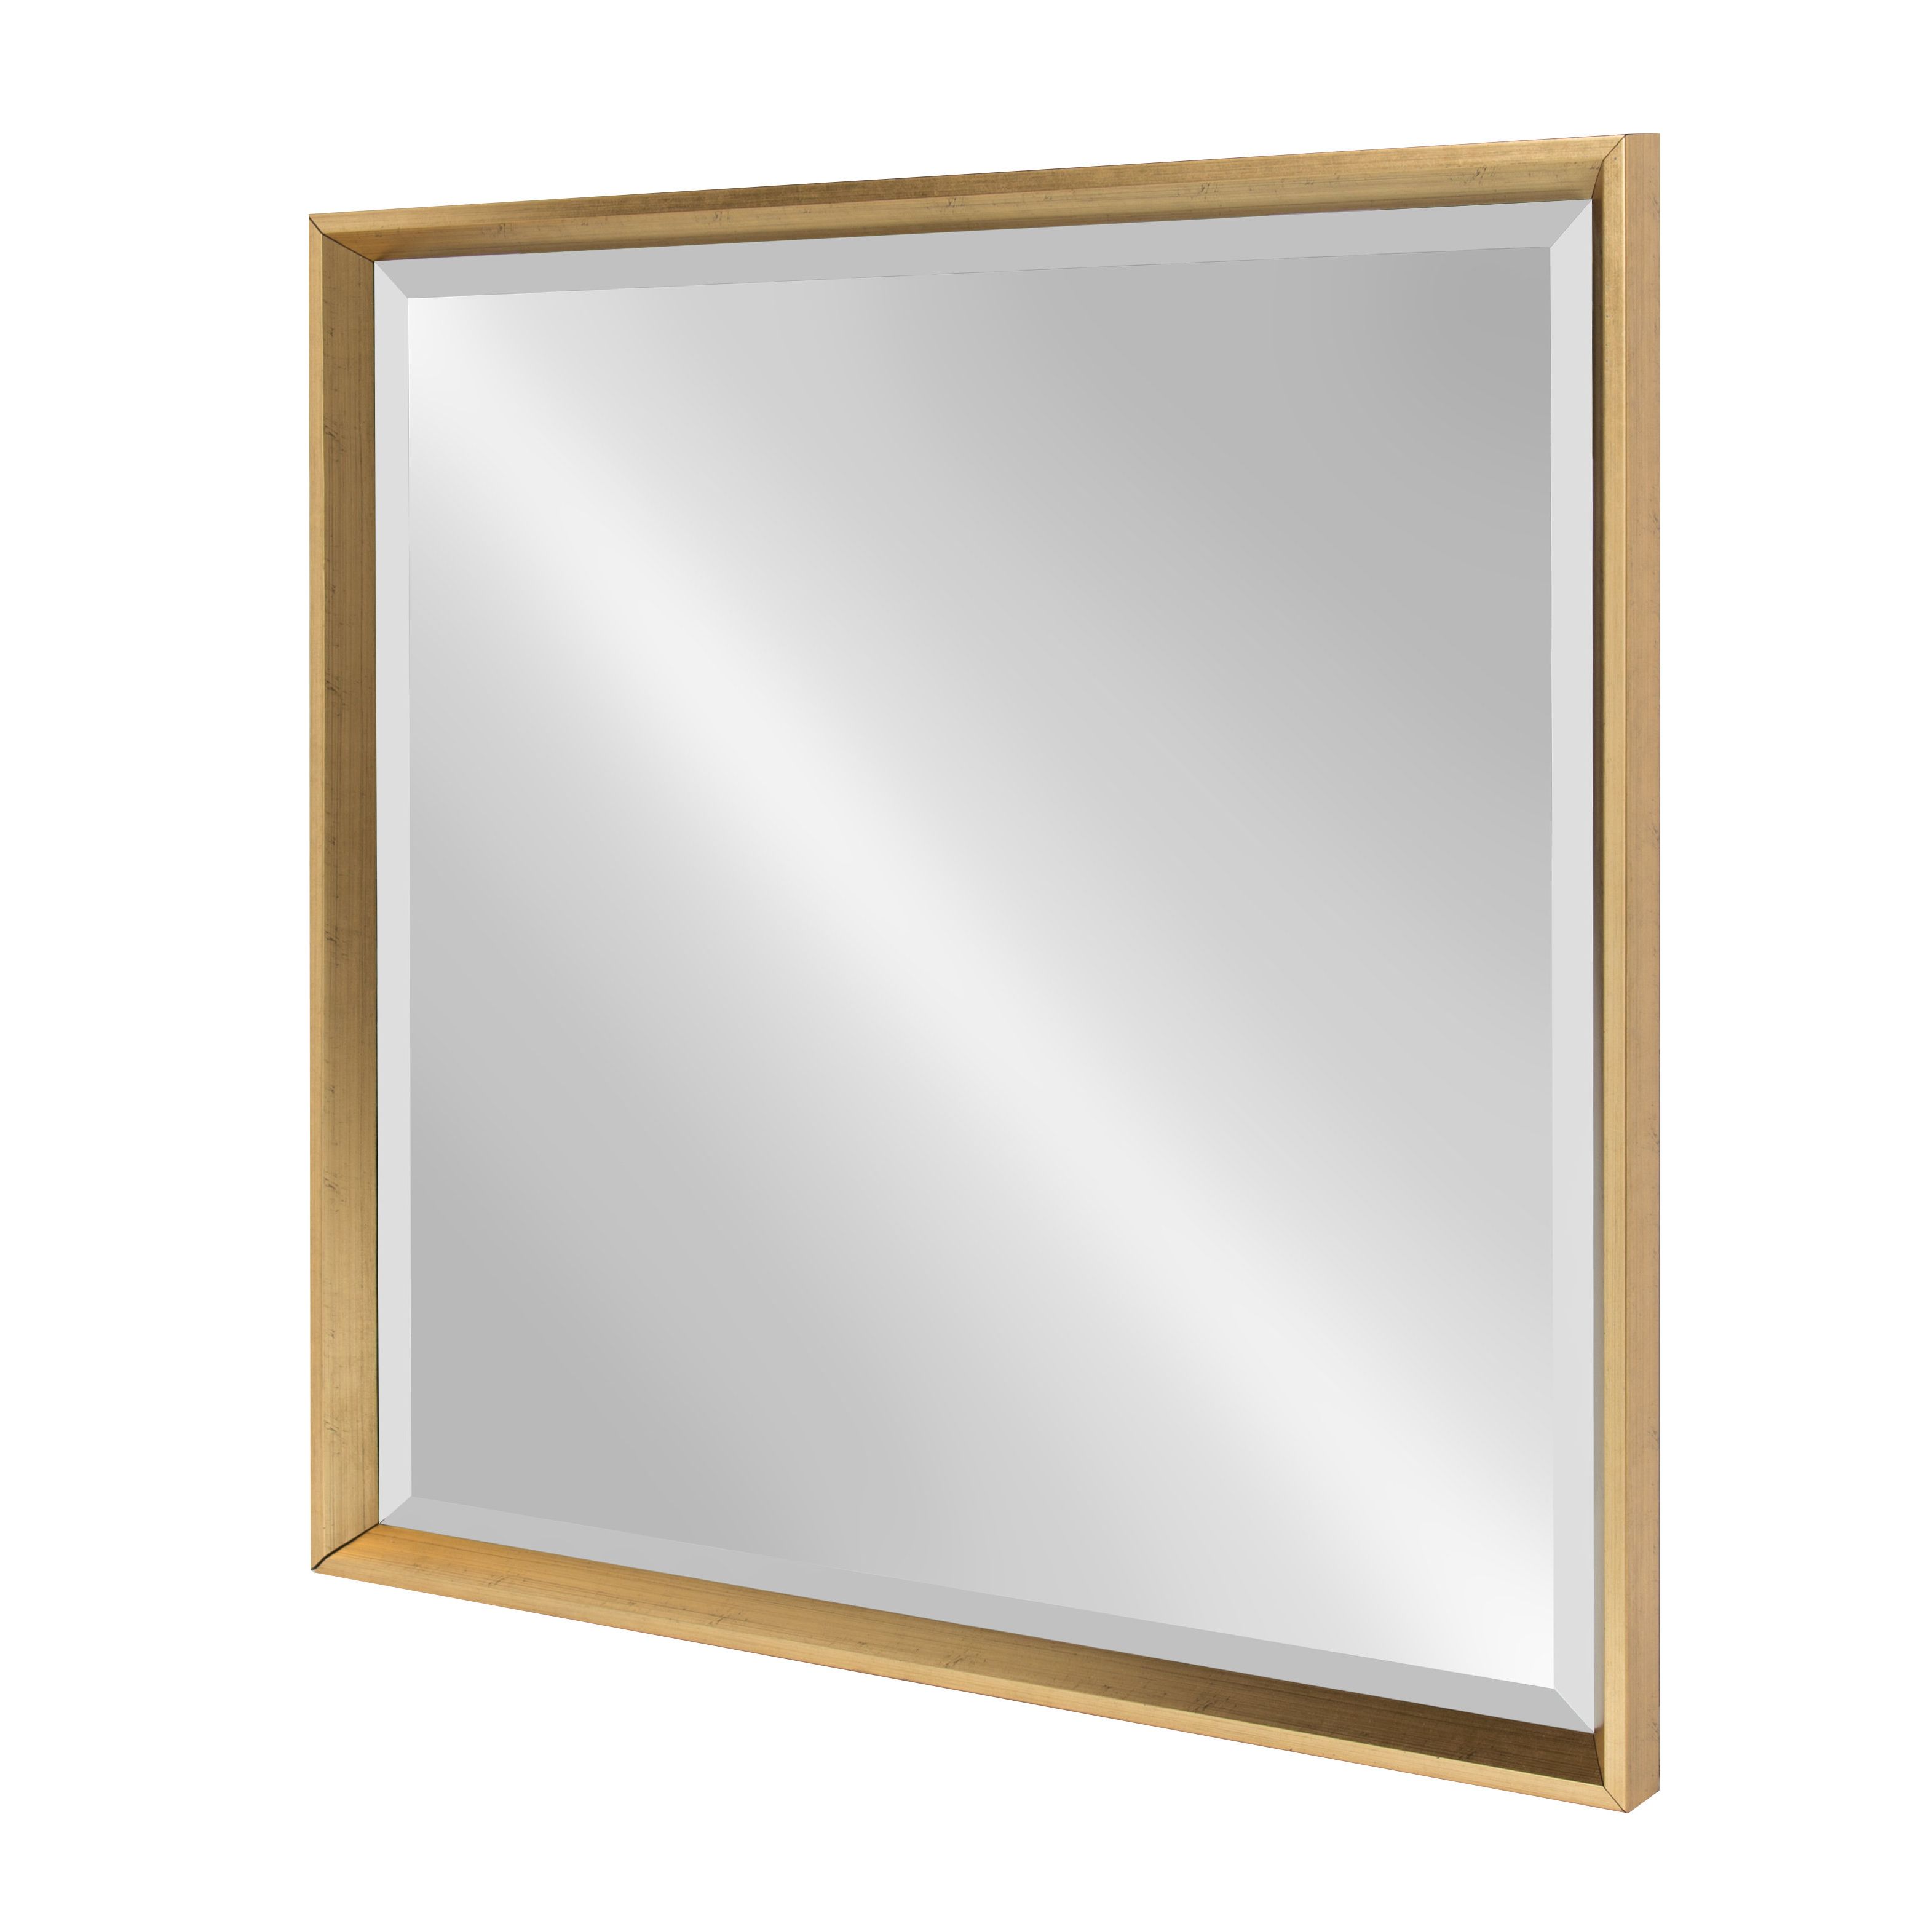 Sundown Framed Glam Beveled Accent Mirror Intended For Preferred Northcutt Accent Mirrors (View 15 of 20)